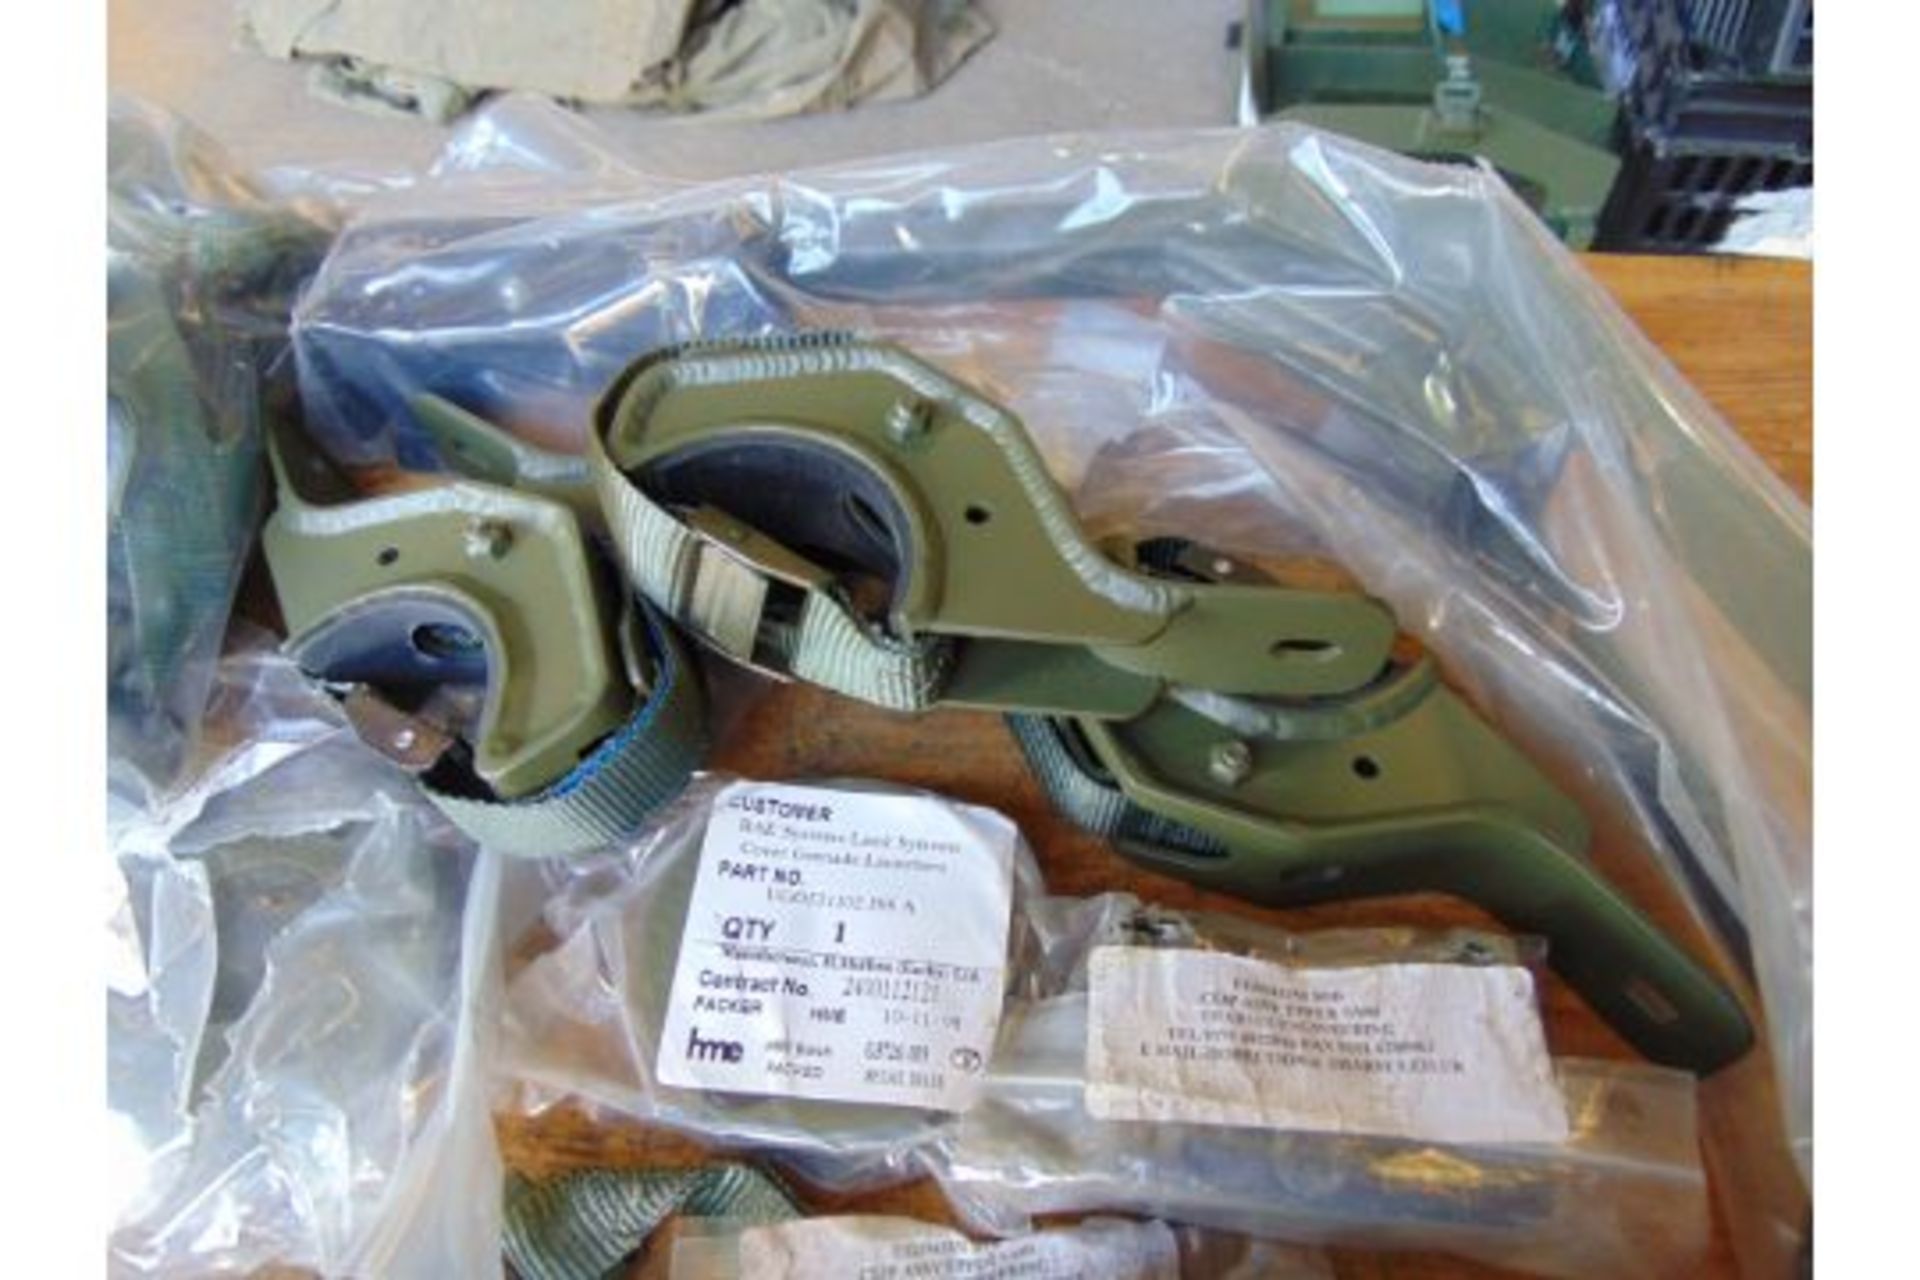 New Unissued WIMIK SA 80 Clips Launcher Covers, Stowage Straps, Barrel Clamps etc - Image 4 of 8